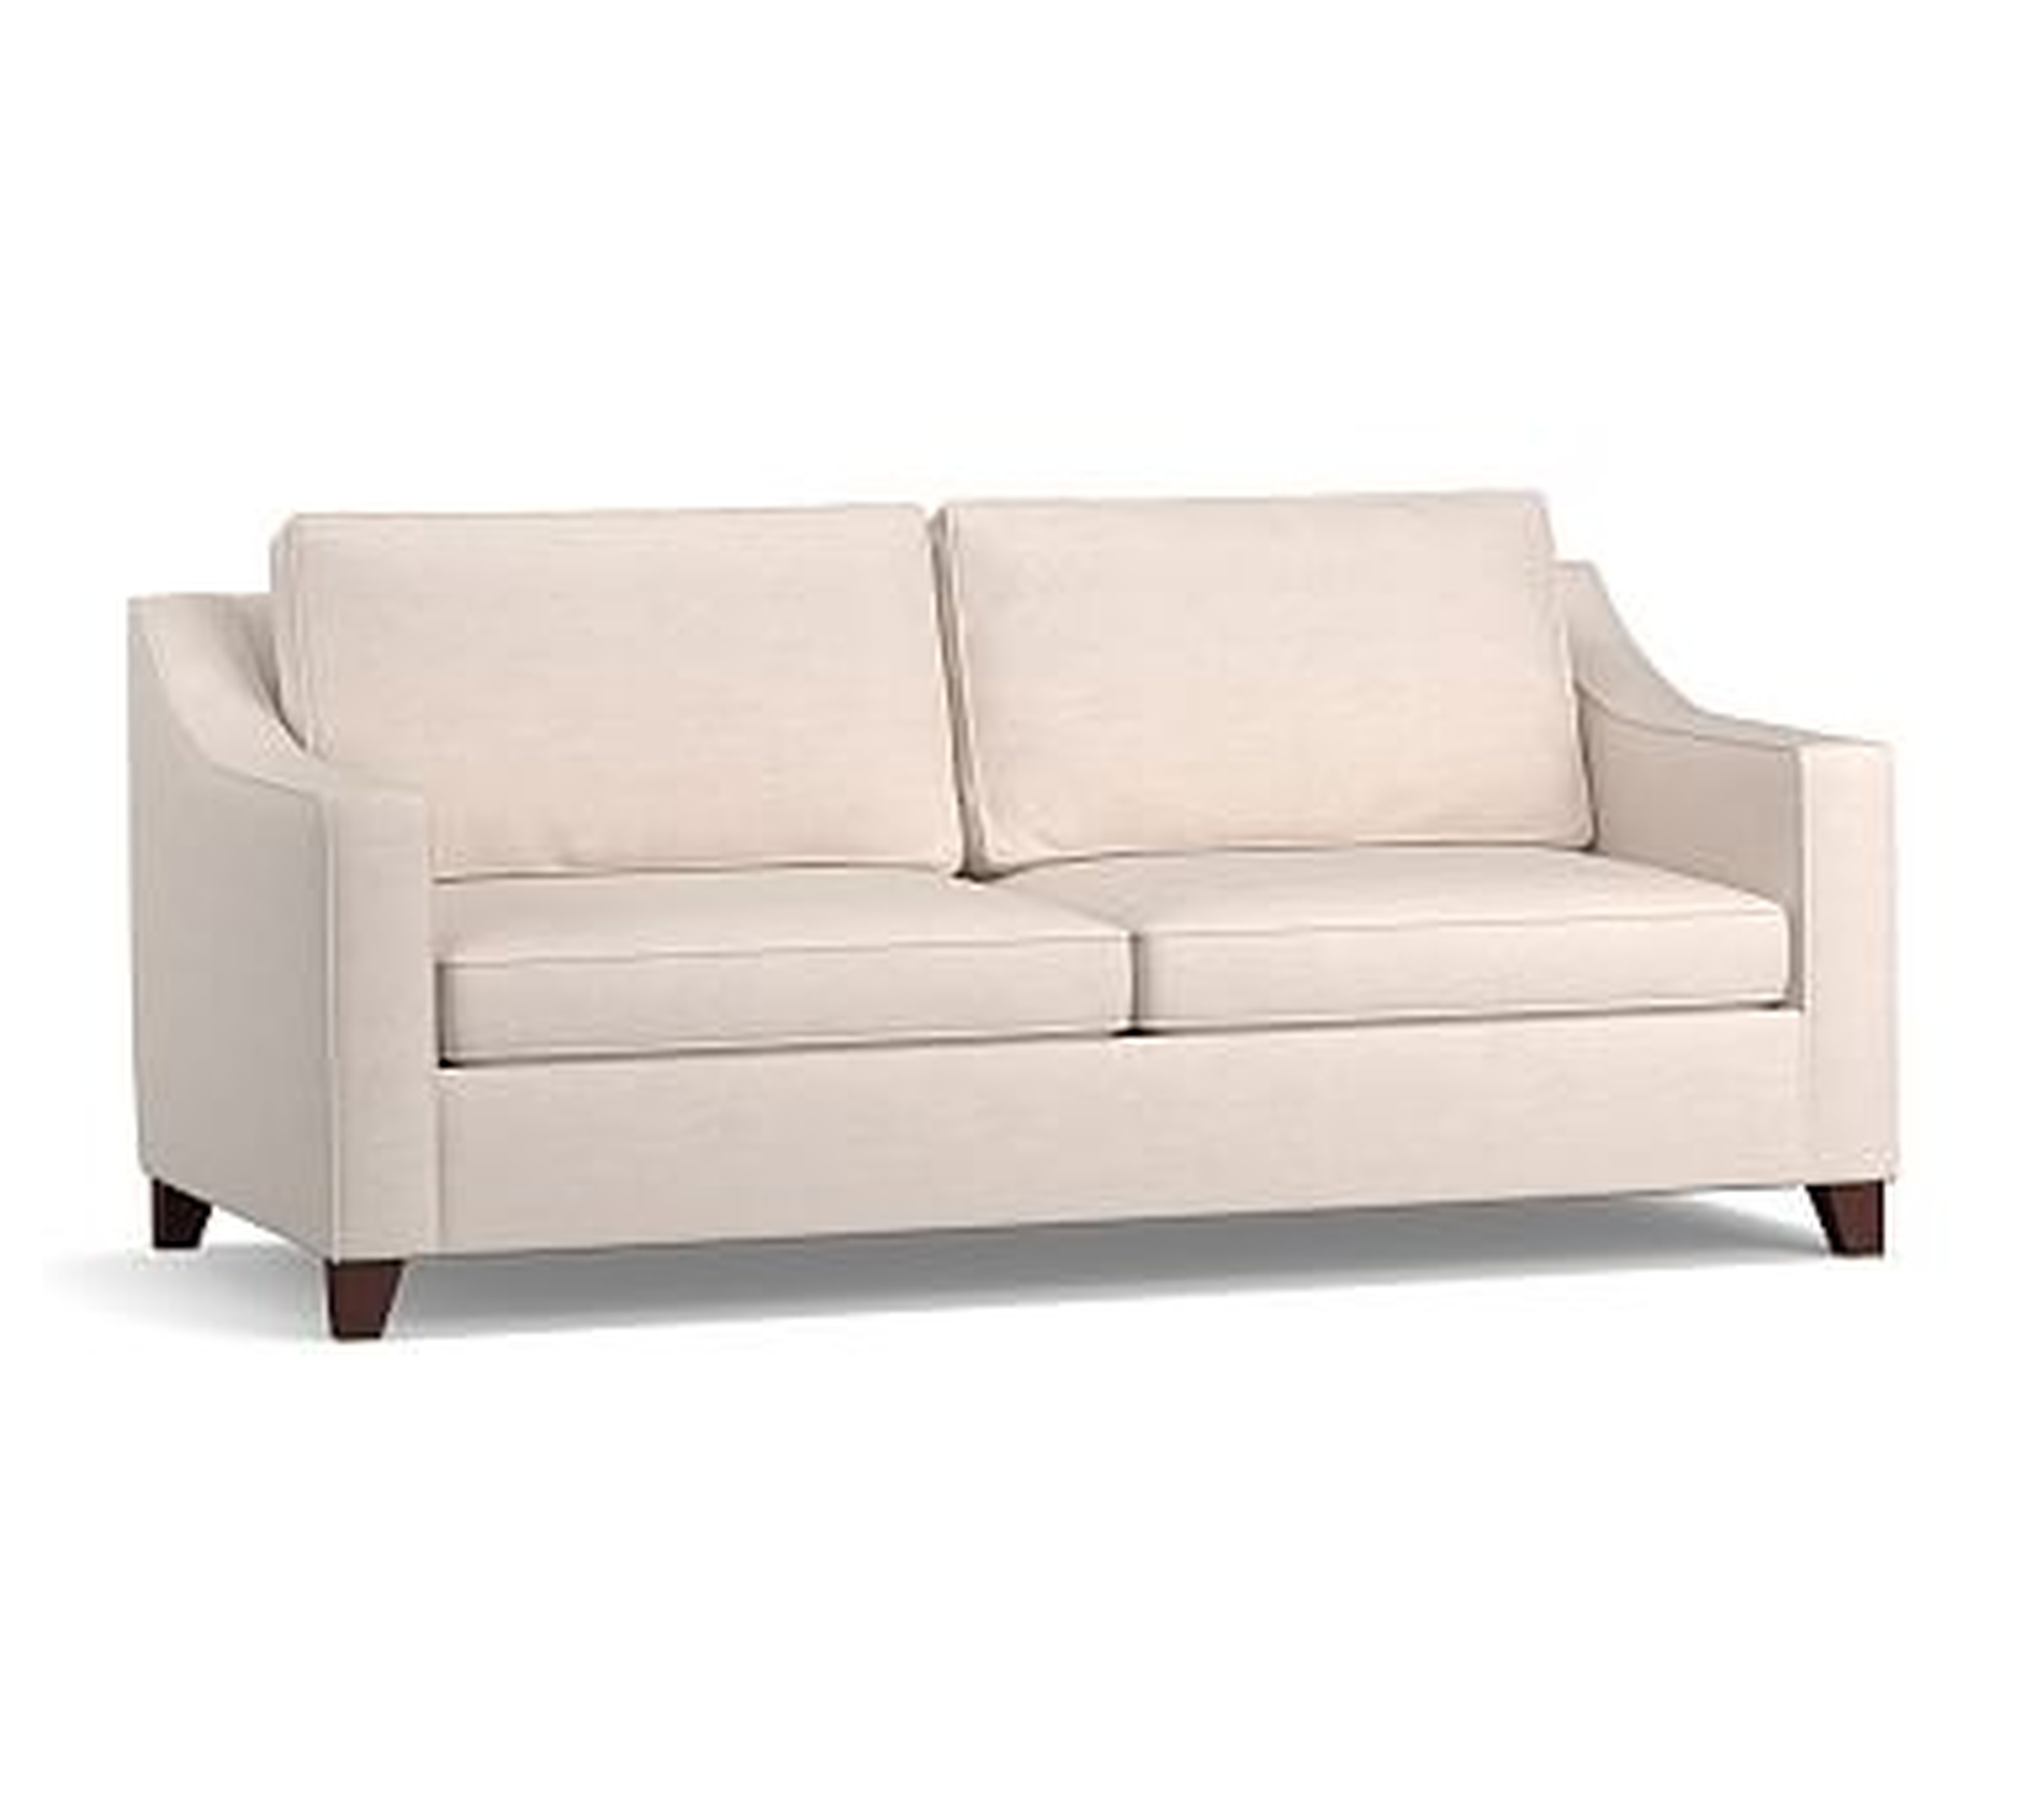 Cameron Slope Arm Upholstered Deep Seat Sofa 2-Seater 85", Polyester Wrapped Cushions, Performance Tweed Ecru - Pottery Barn